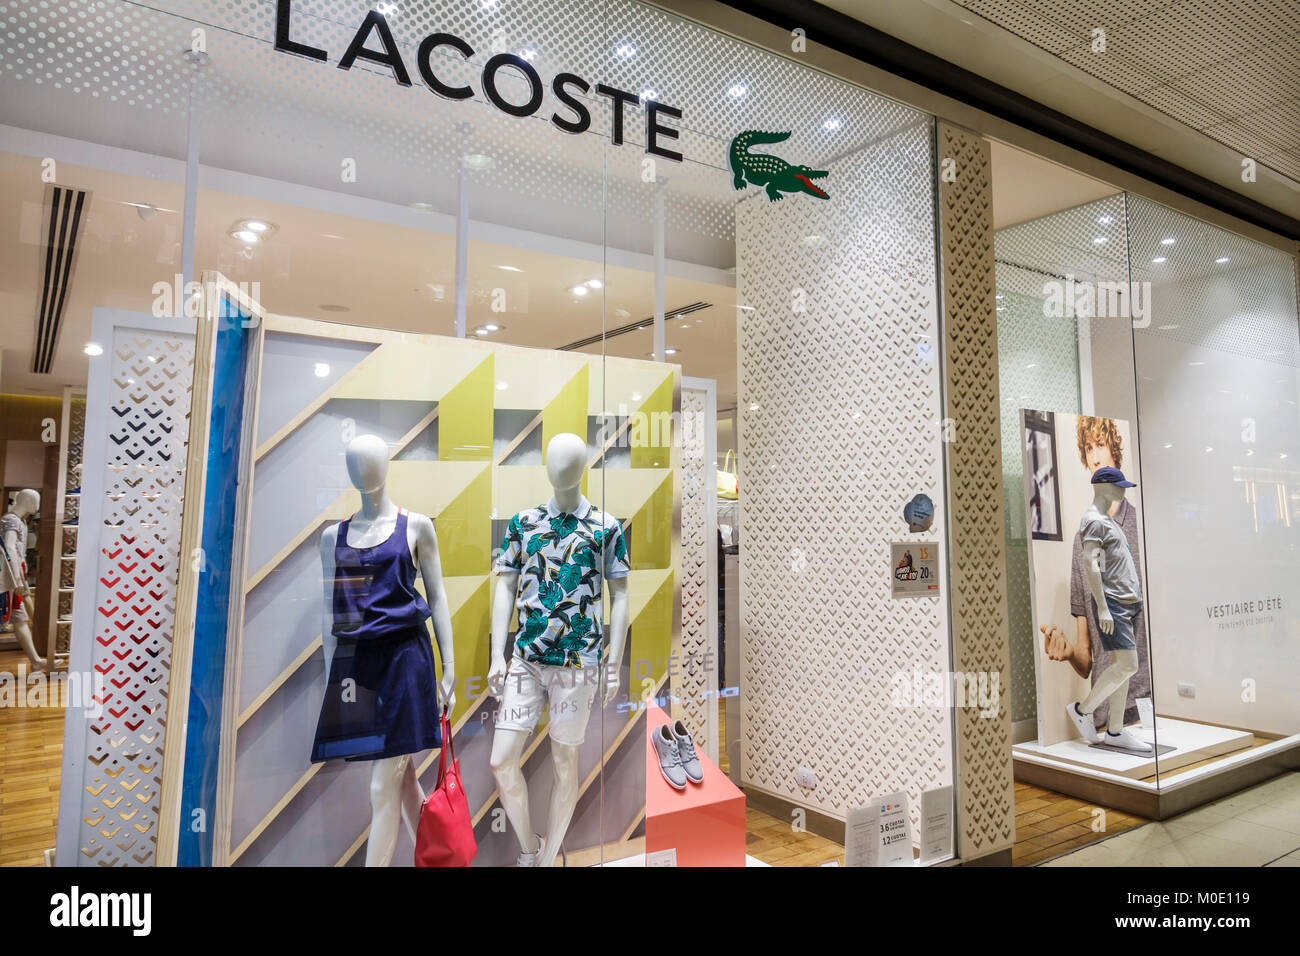 Buenos Aires Argentina,Abasto Shopping Mall,LaCoste,boutique,designer,clothes,store window,mannequin,Hispanic ARG171122070 Stock Photo